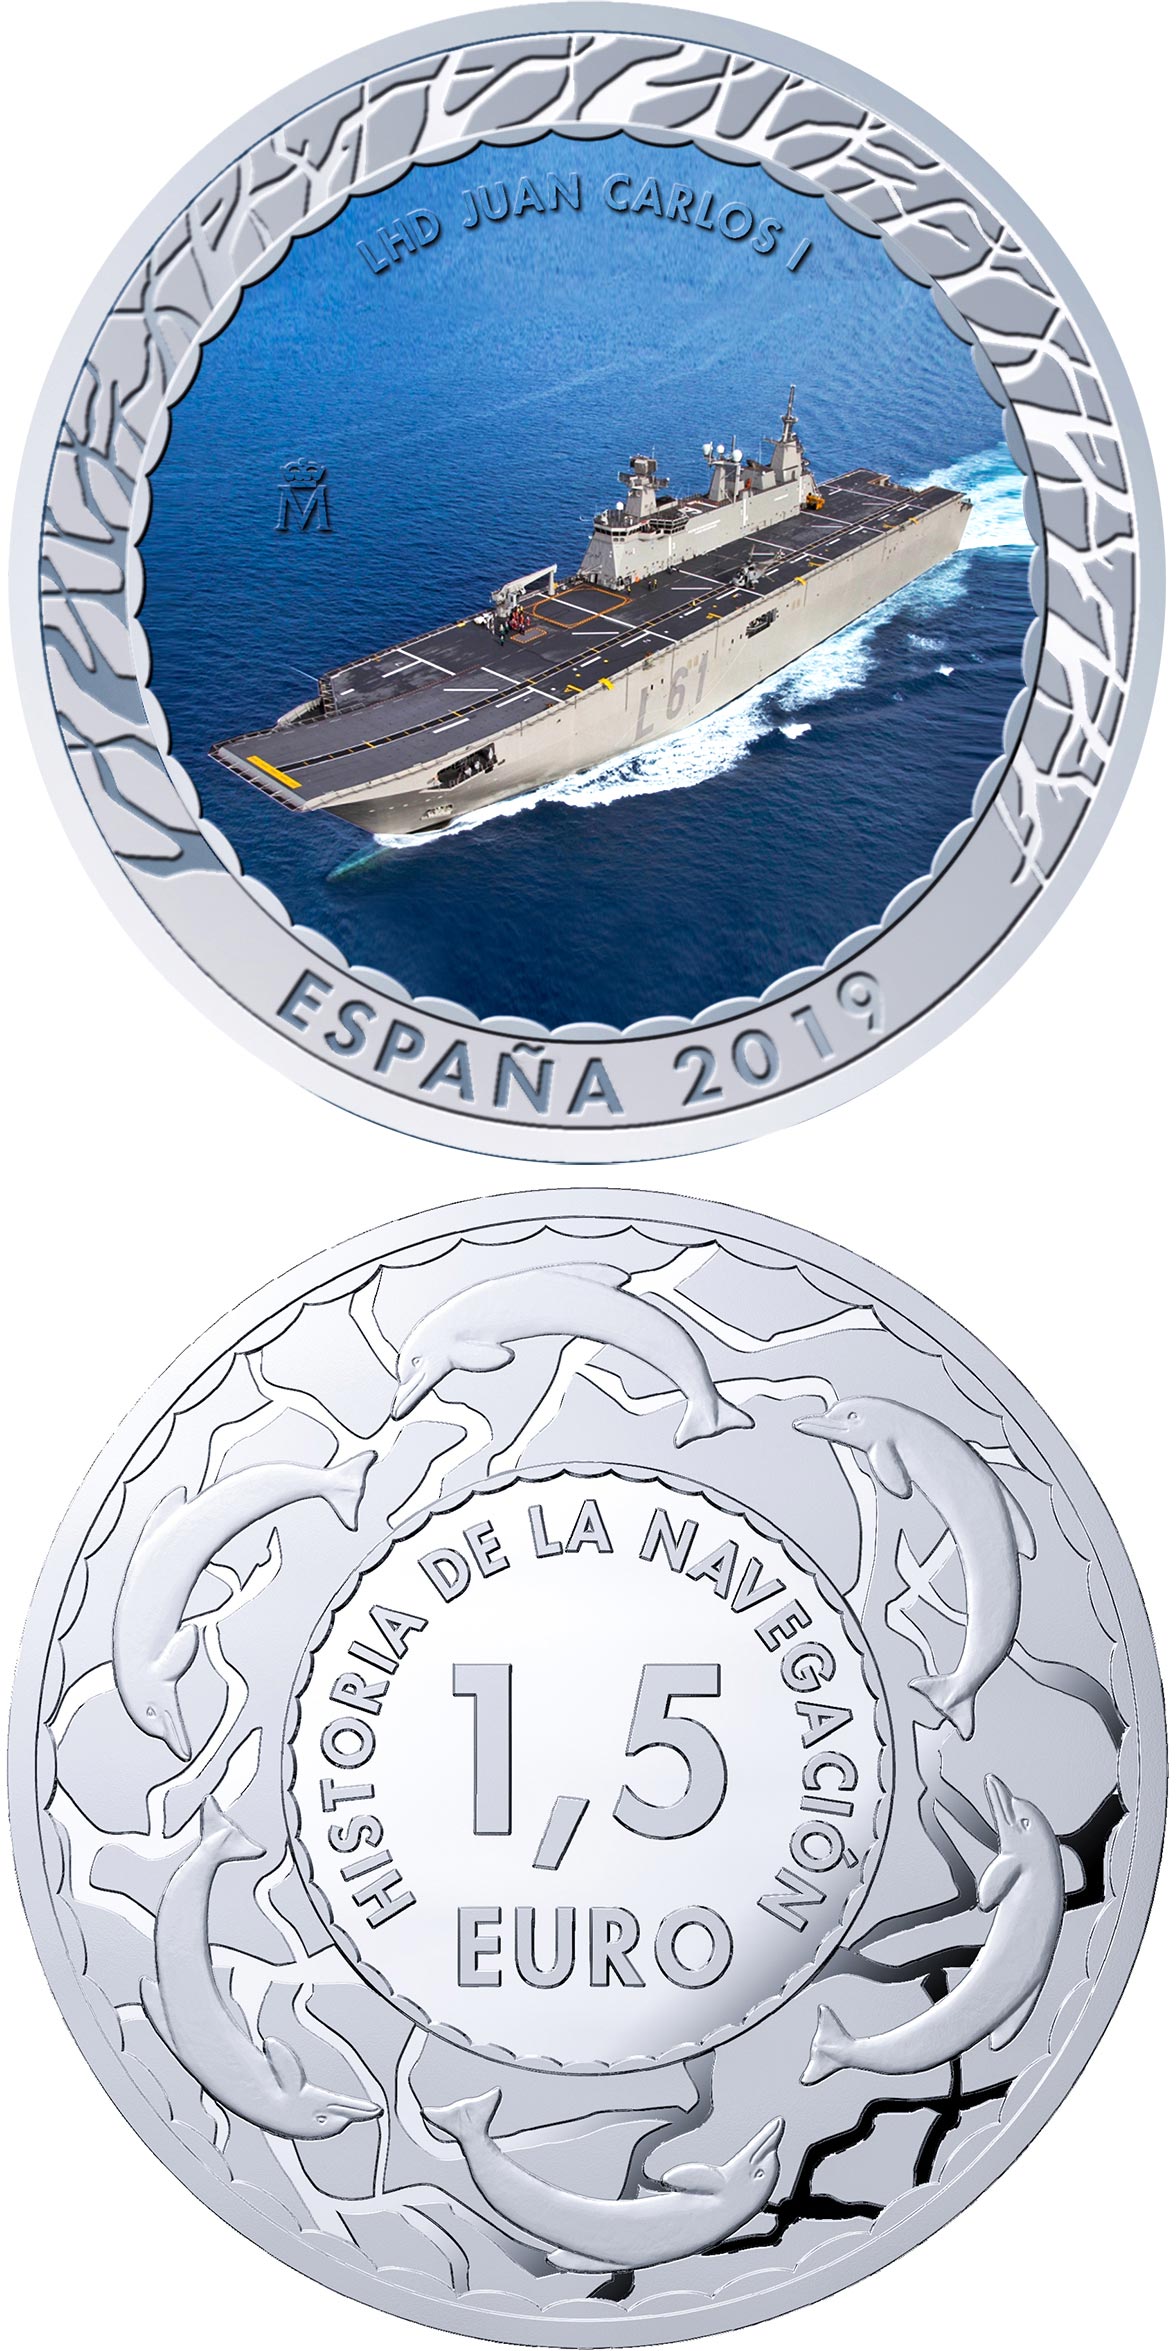 Image of 1.5 euro coin - LHD Juan Carlos I | Spain 2019.  The Copper–Nickel (CuNi) coin is of BU quality.